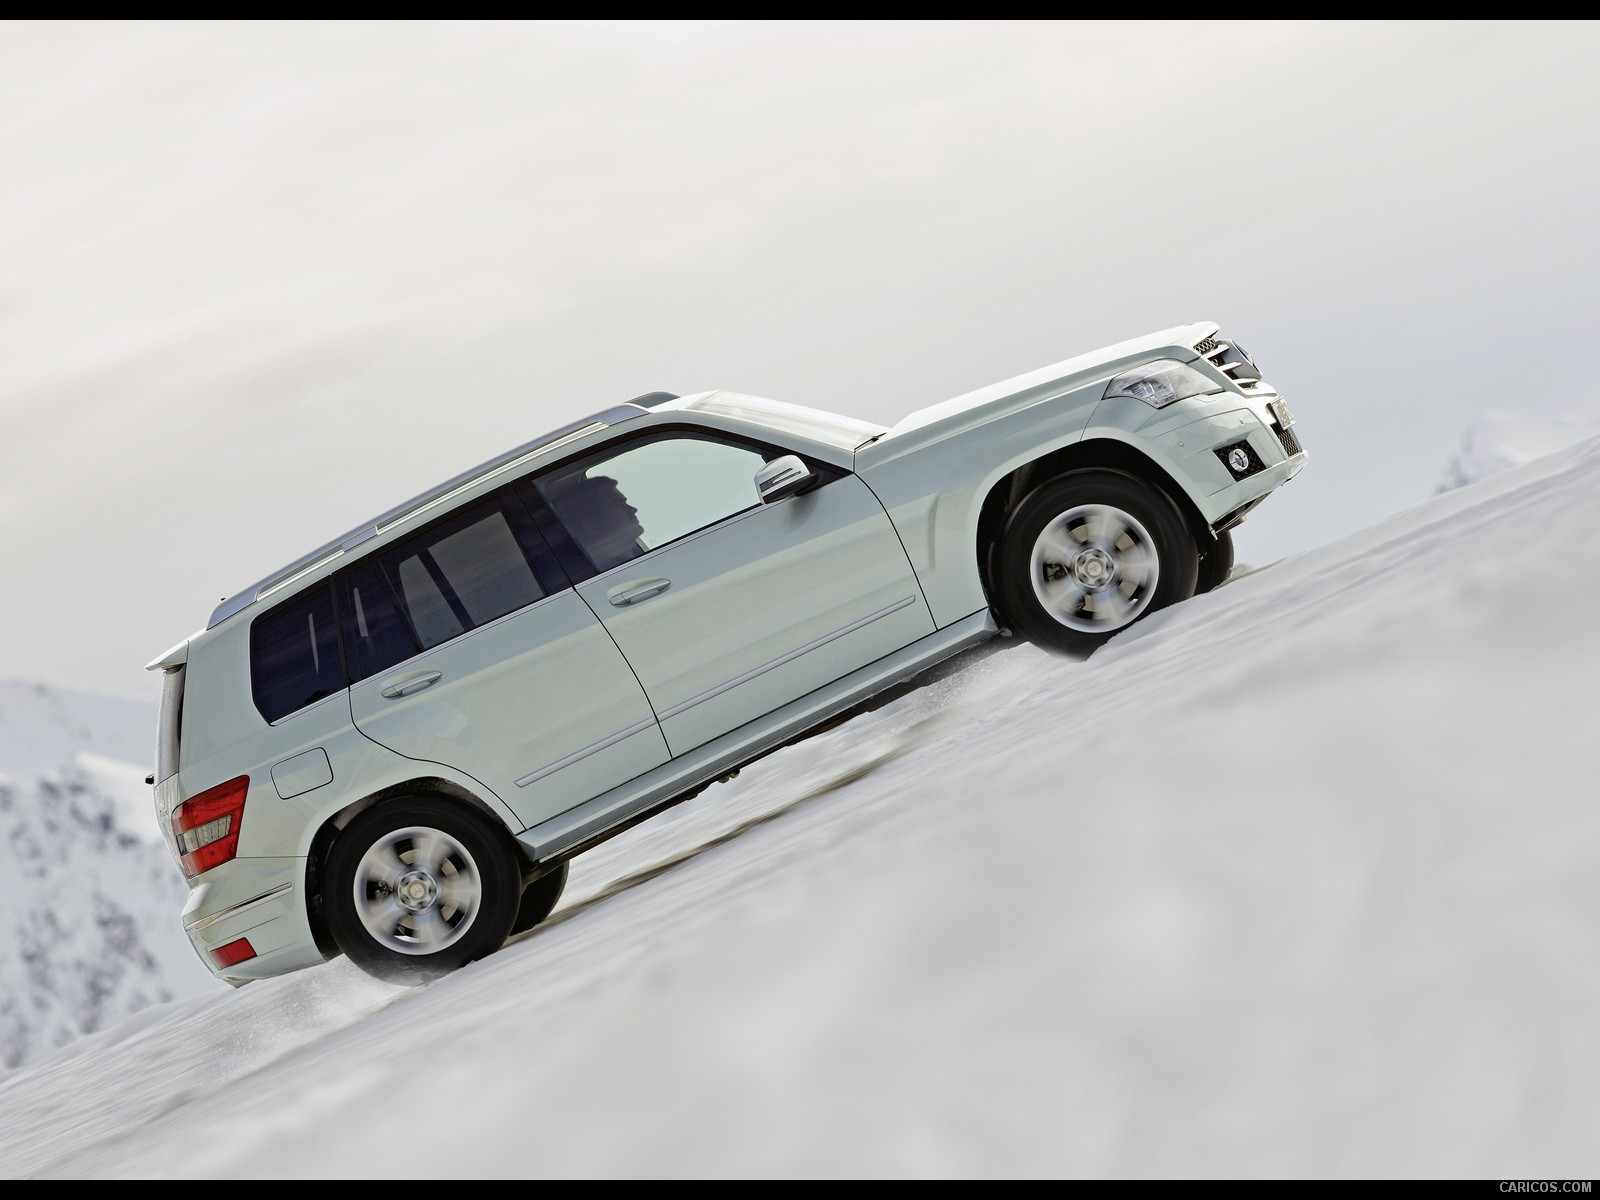 Mercedes-Benz GLK-Class - On Snow - Side, #43 of 351